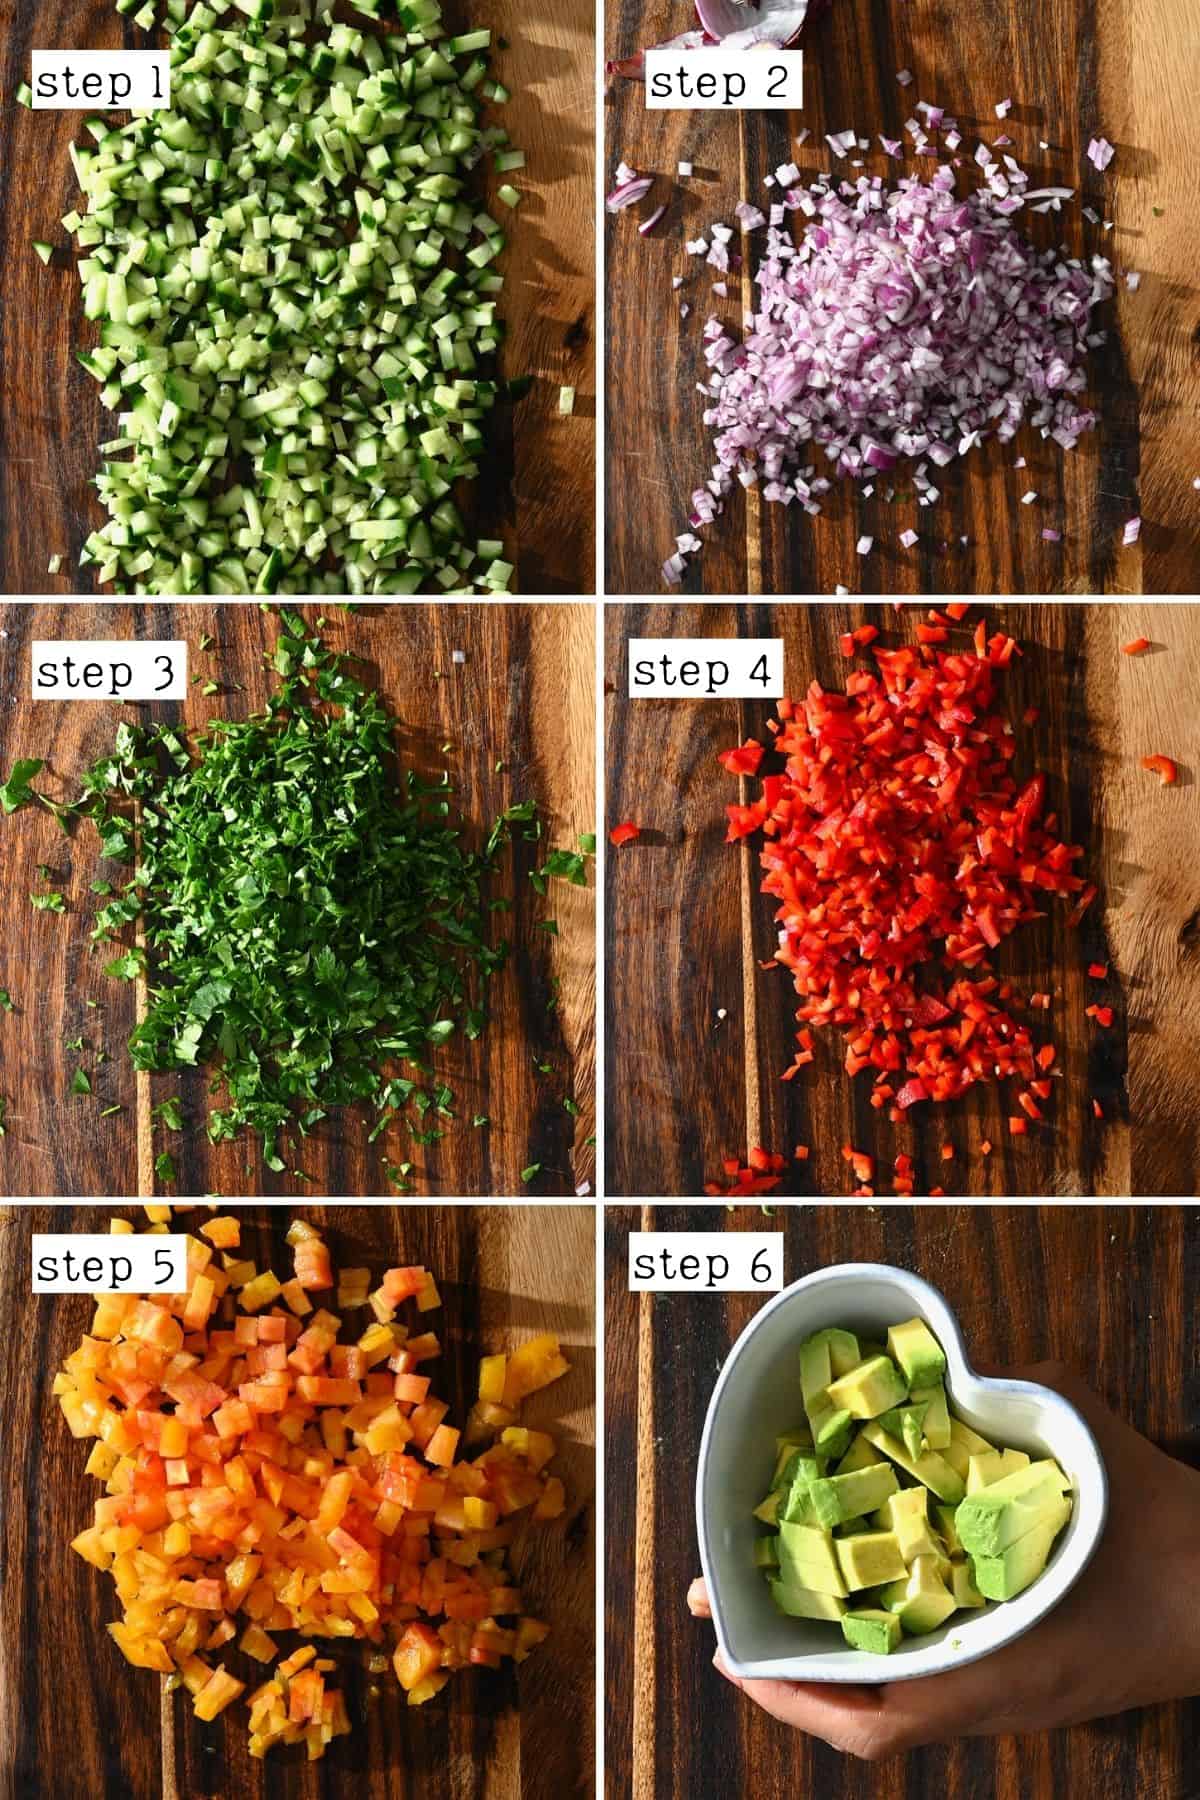 Steps for chopping salad ingredients